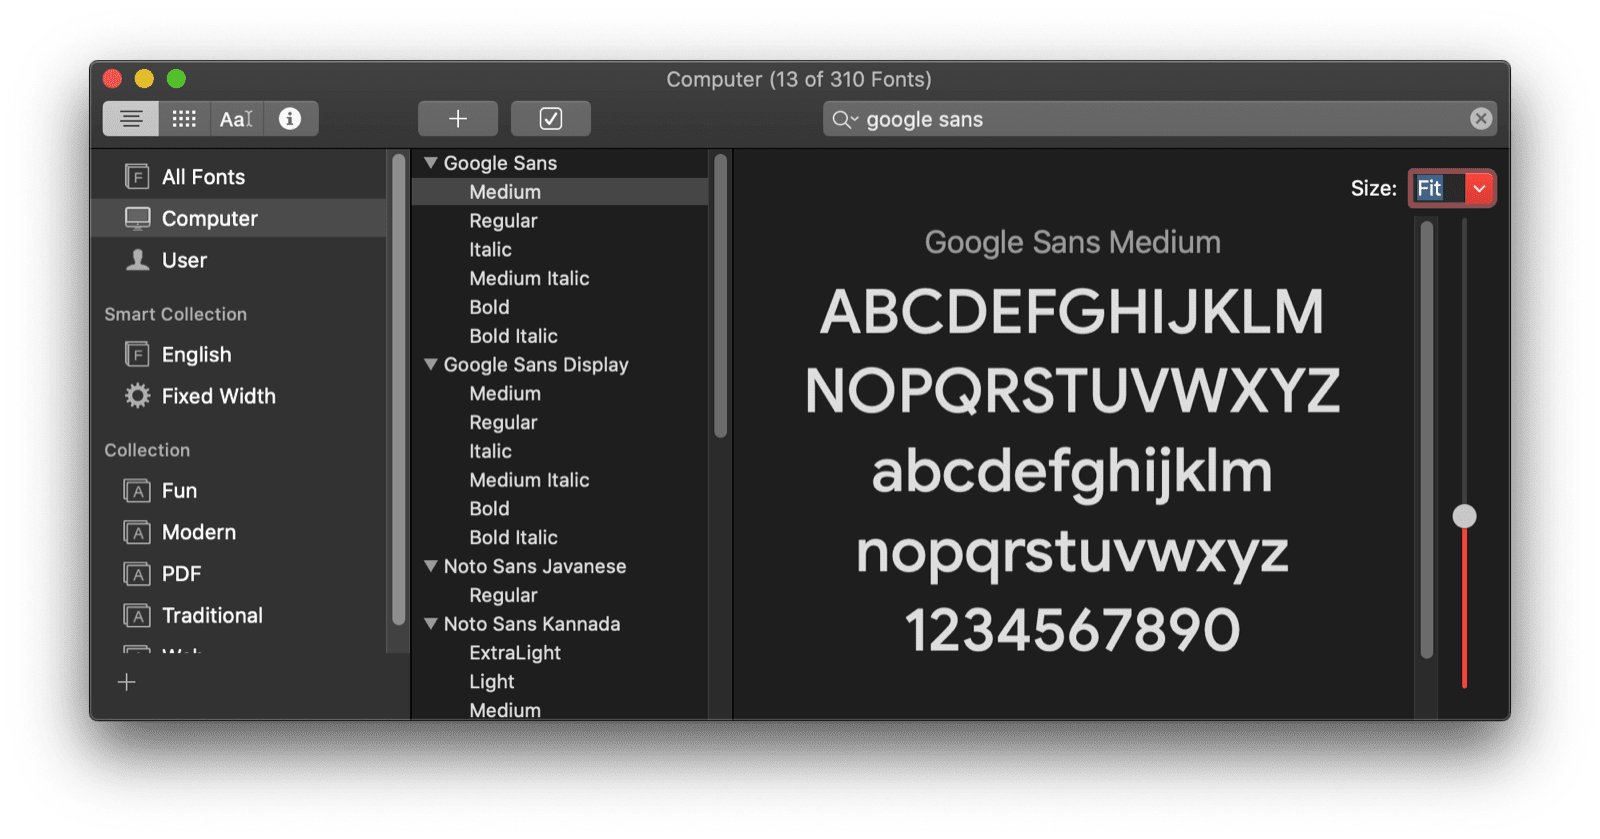 The macOS Font Book app showing a preview of the Google Sans font.